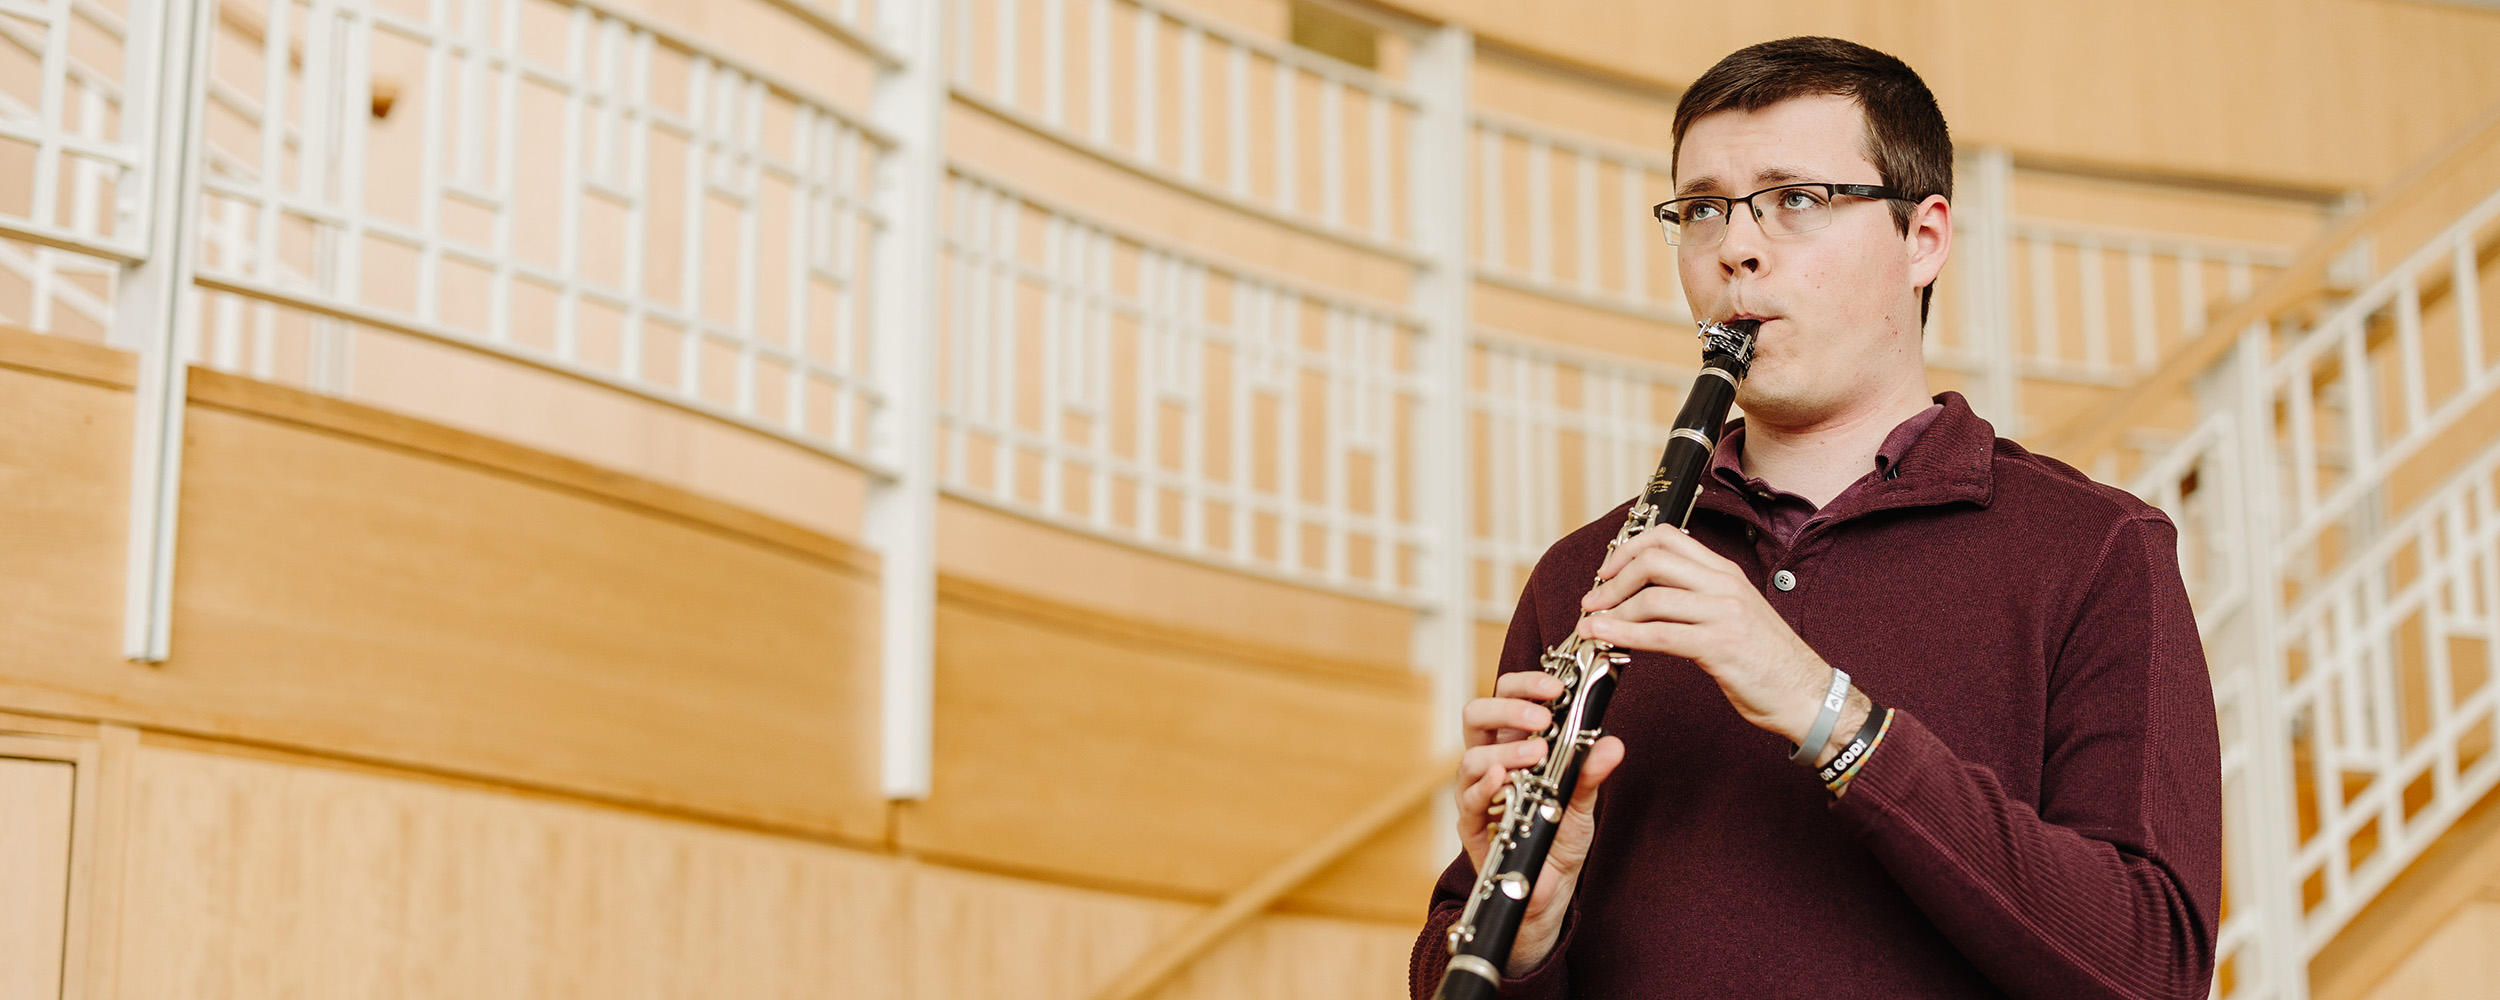 A music performance student at Gordon College playing the clarinet.